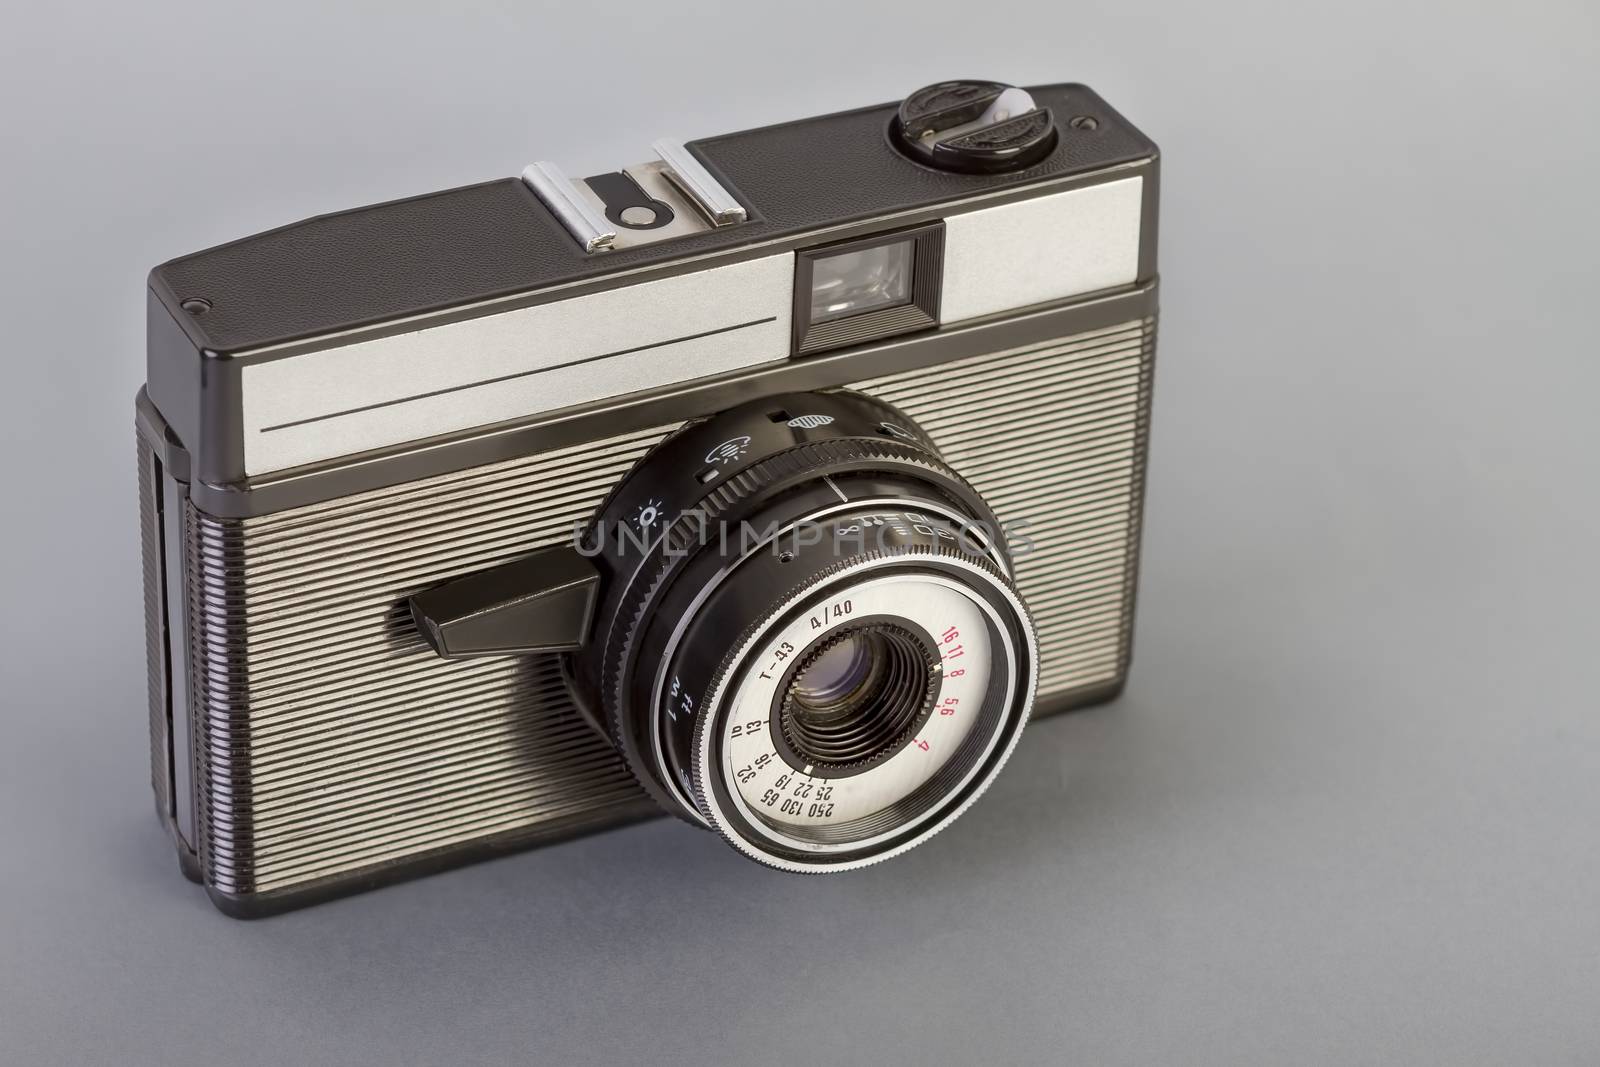 Vintage photo camera on a gray table.
